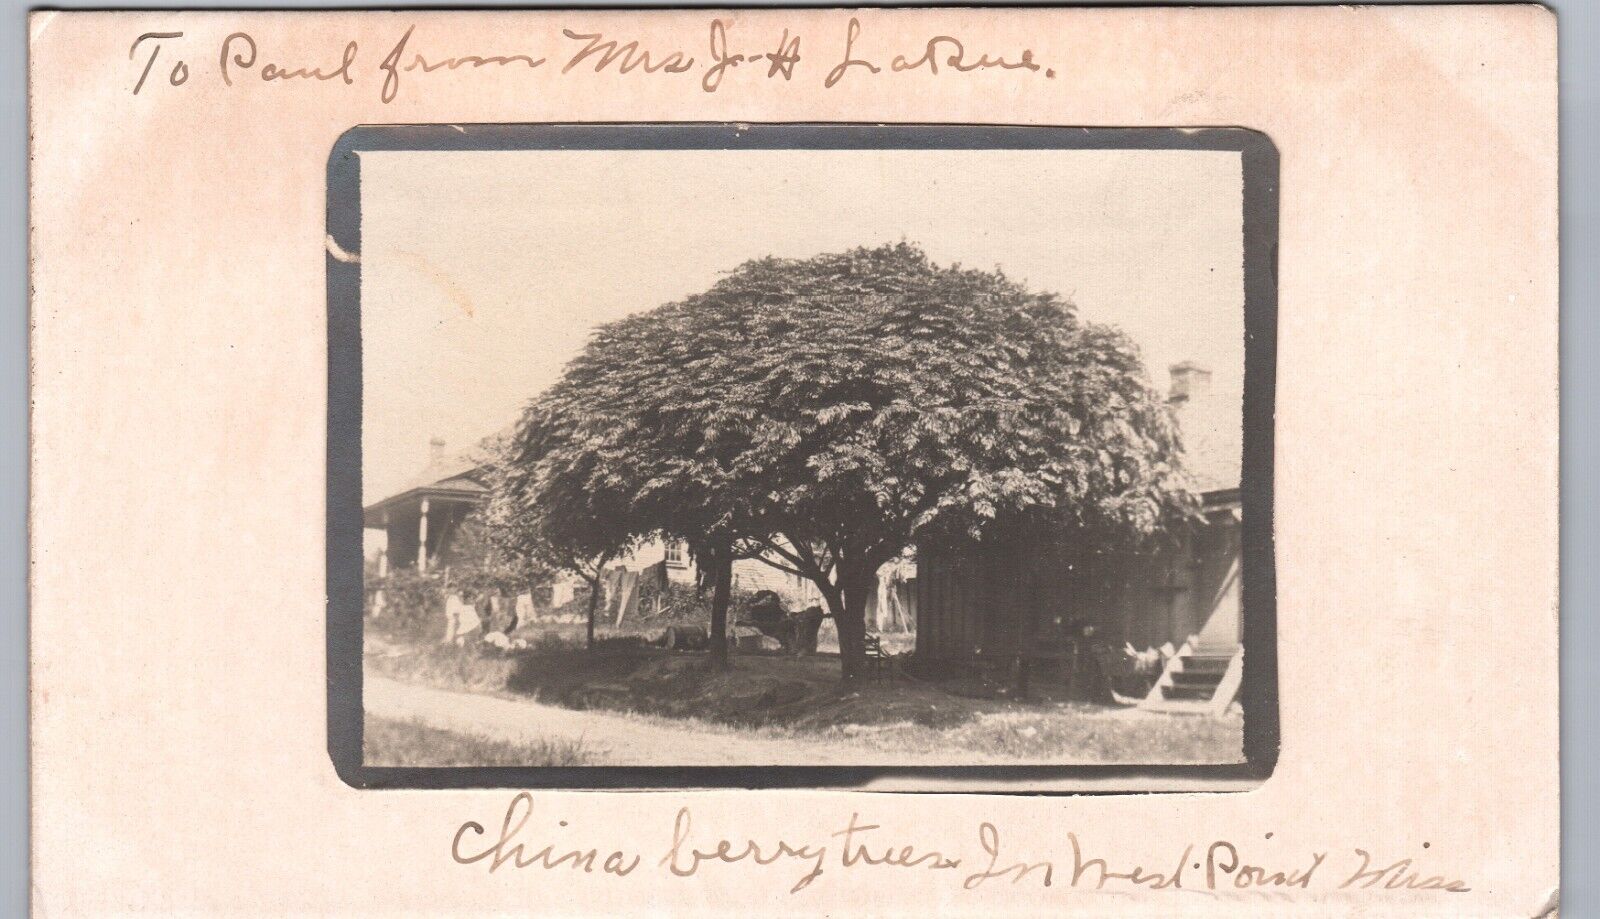 CHINA BERRY TREES west point ms antique homemade postcard mississippi diy rppc